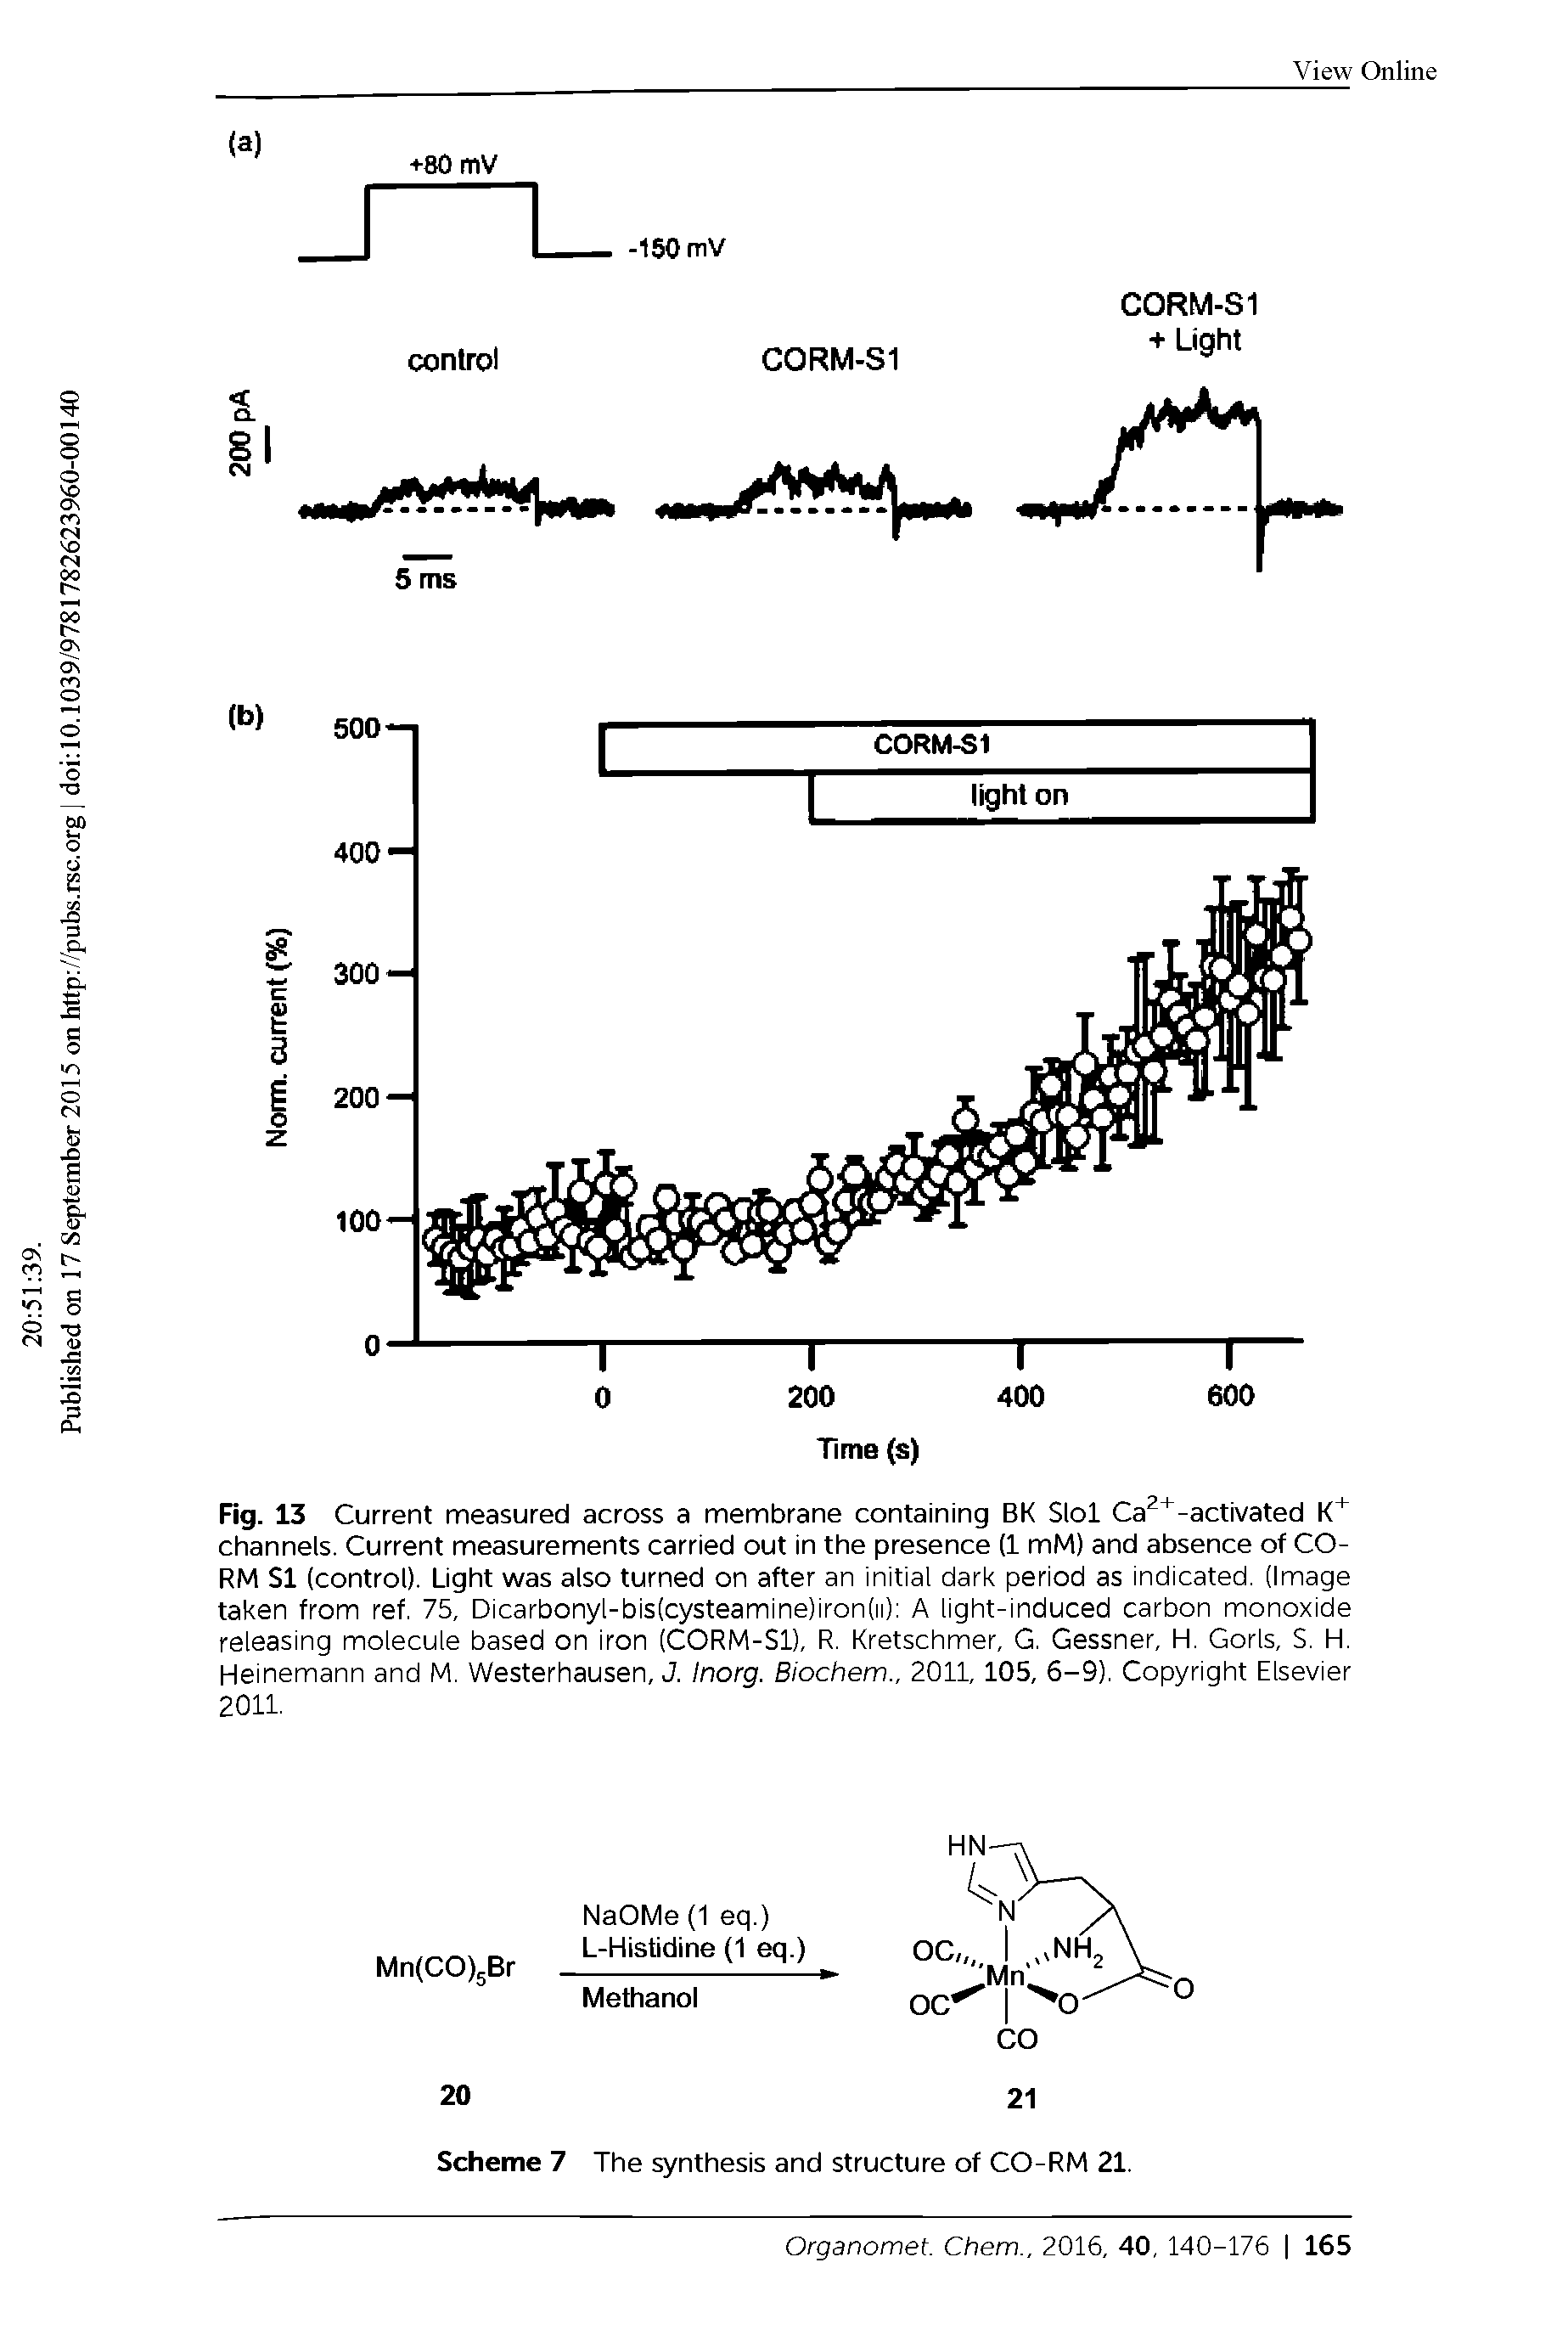 Fig. 13 Current measured across a membrane containing BK Slol Ca -activated K" channels. Current measurements carried out in the presence (1 mM) and absence of CO-RM SI (control). Light was also turned on after an initial dark period as indicated. (Image taken from ref. 75, Dicarbonyl-bis(cysteamine)iron(ii) A light-induced carbon monoxide releasing molecule based on iron (CORM-Sl), R. Kretschmer, G. Gessner, H. Gorls, S. H. Heinemann and M. Westerhausen, J. Inorg. Biochem., 2011,105, 6-9). Copyright Elsevier 2011.